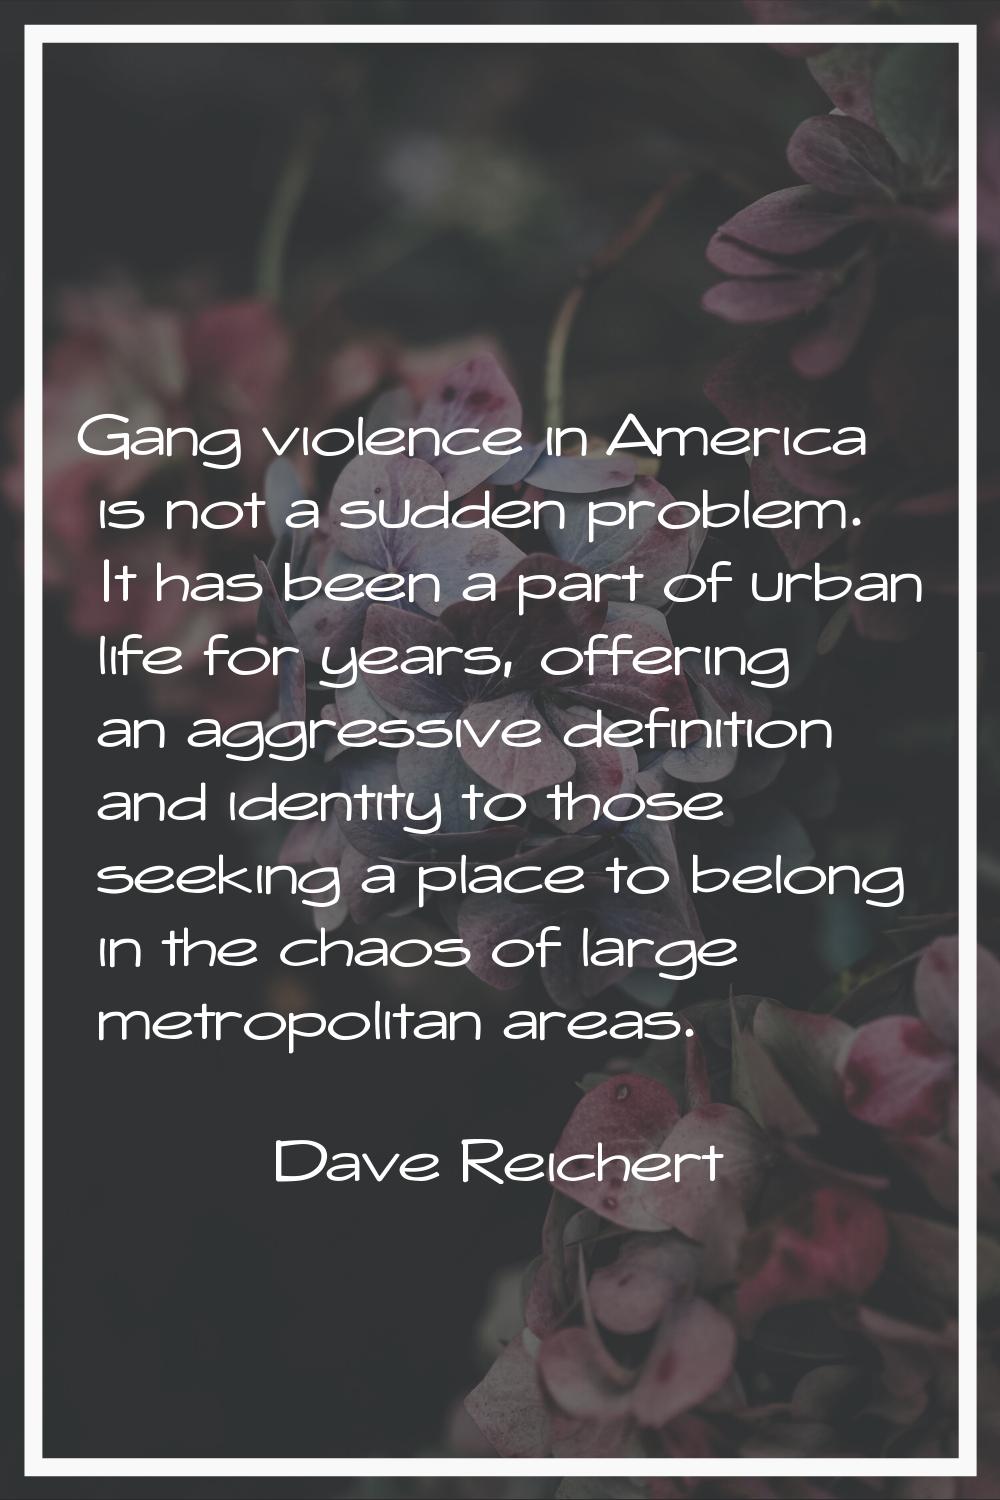 Gang violence in America is not a sudden problem. It has been a part of urban life for years, offer